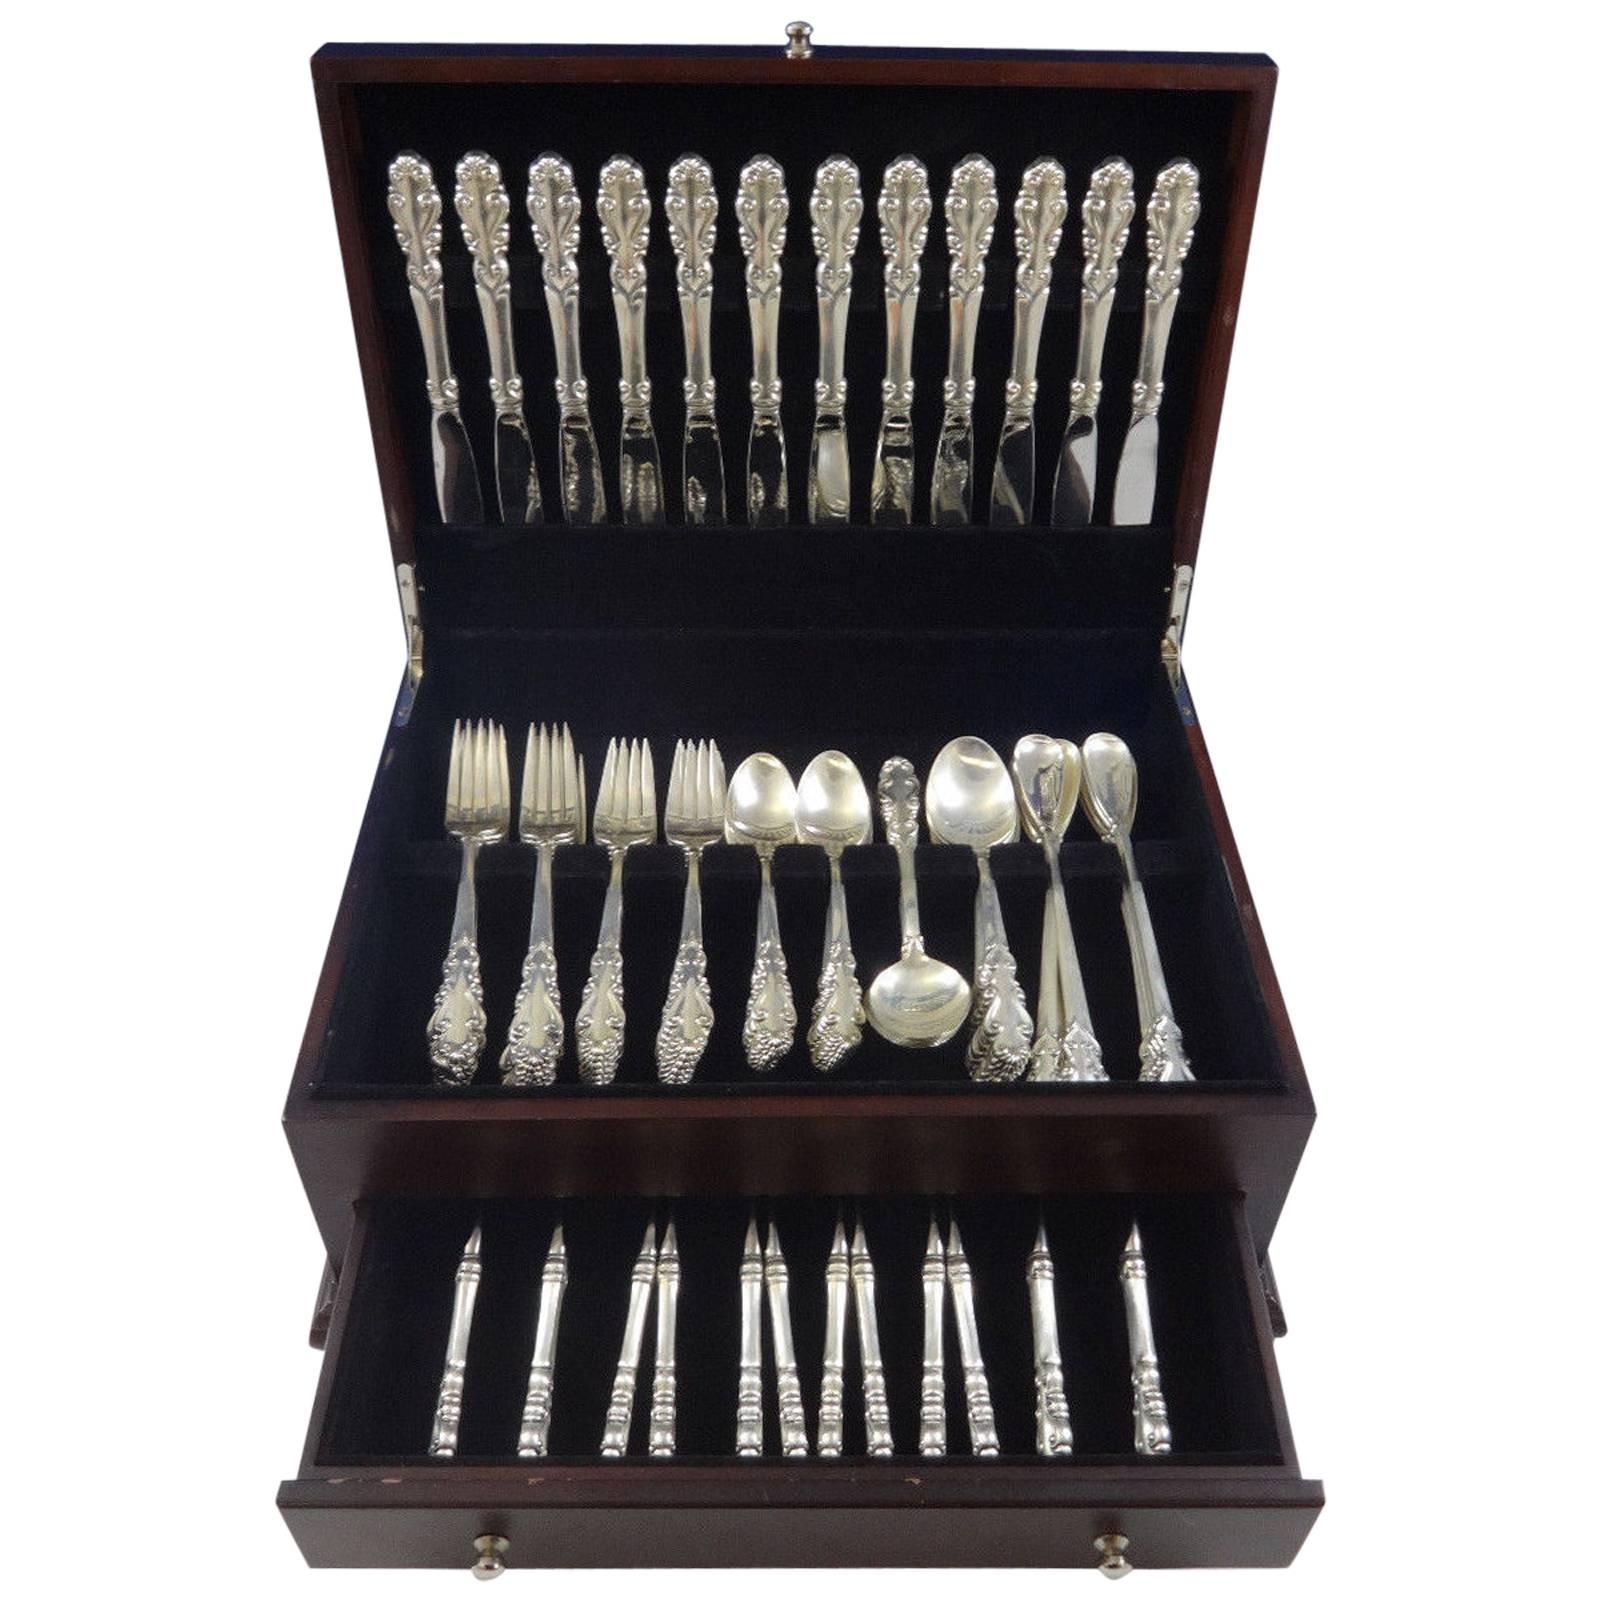 Gorgeous Esplanade by Towle sterling silver flatware set of 84 pieces. This set includes:

12 knives, 8 3/4